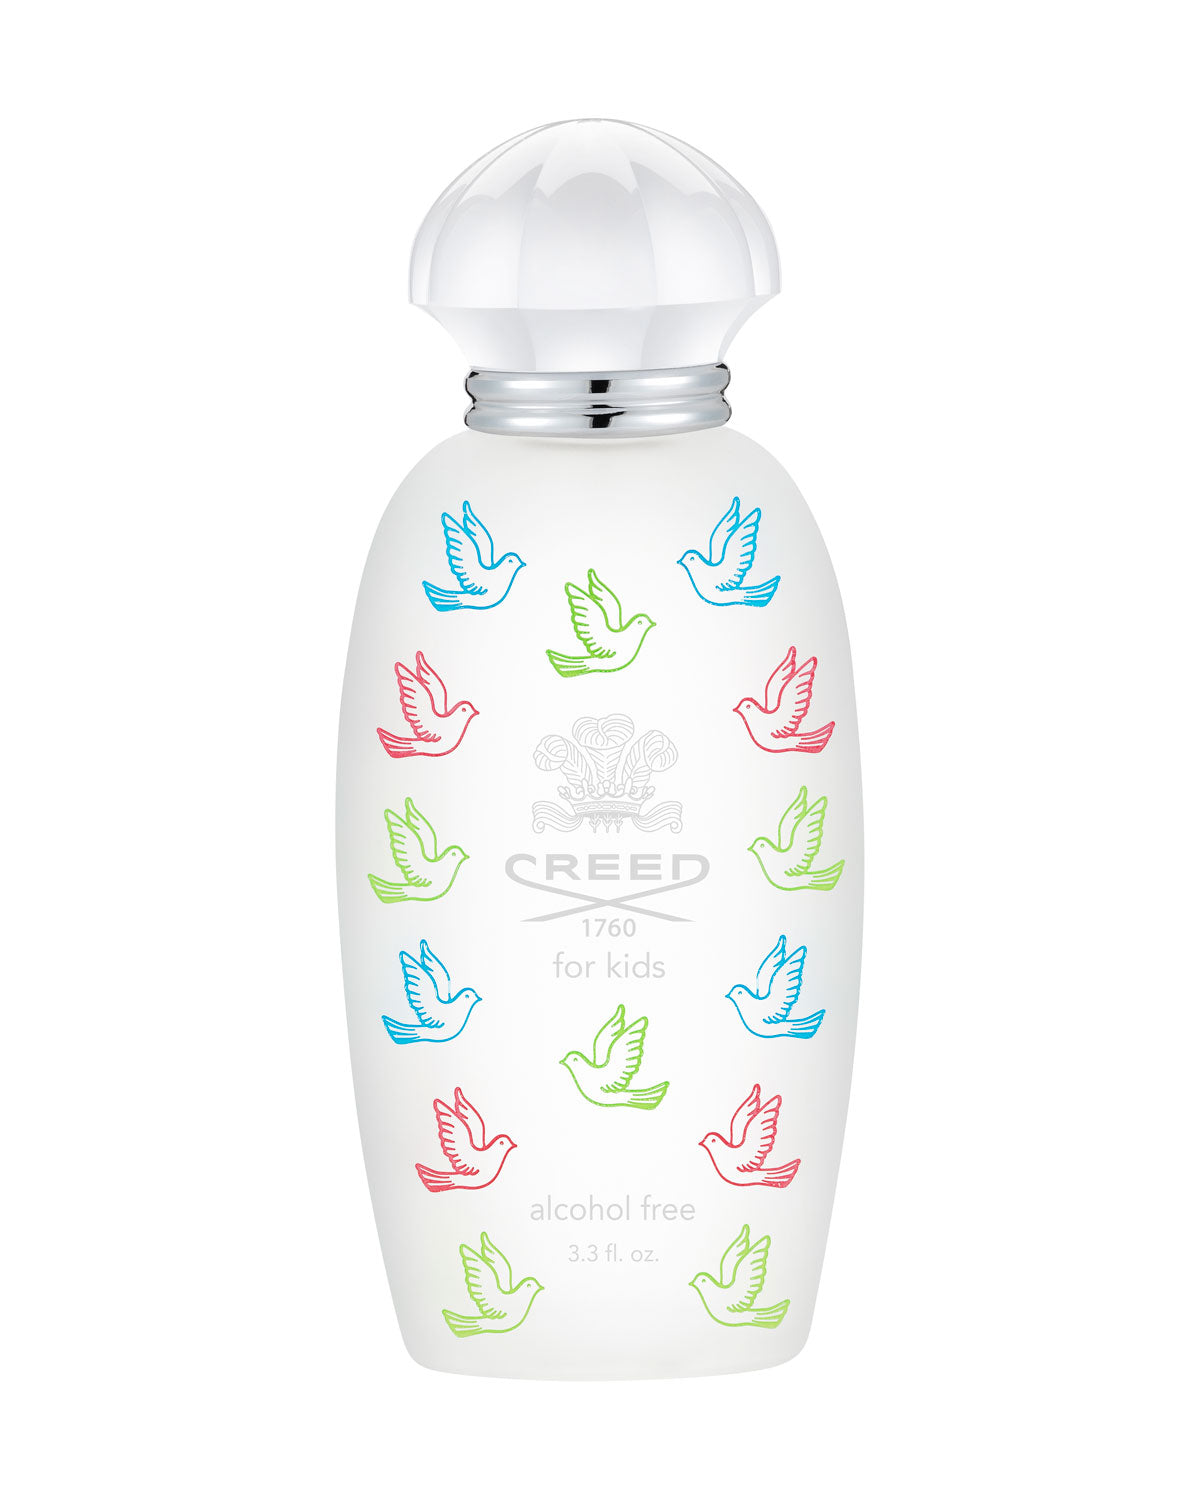 Creed for Kids 3.4 oz 100 ml Alcohol Free